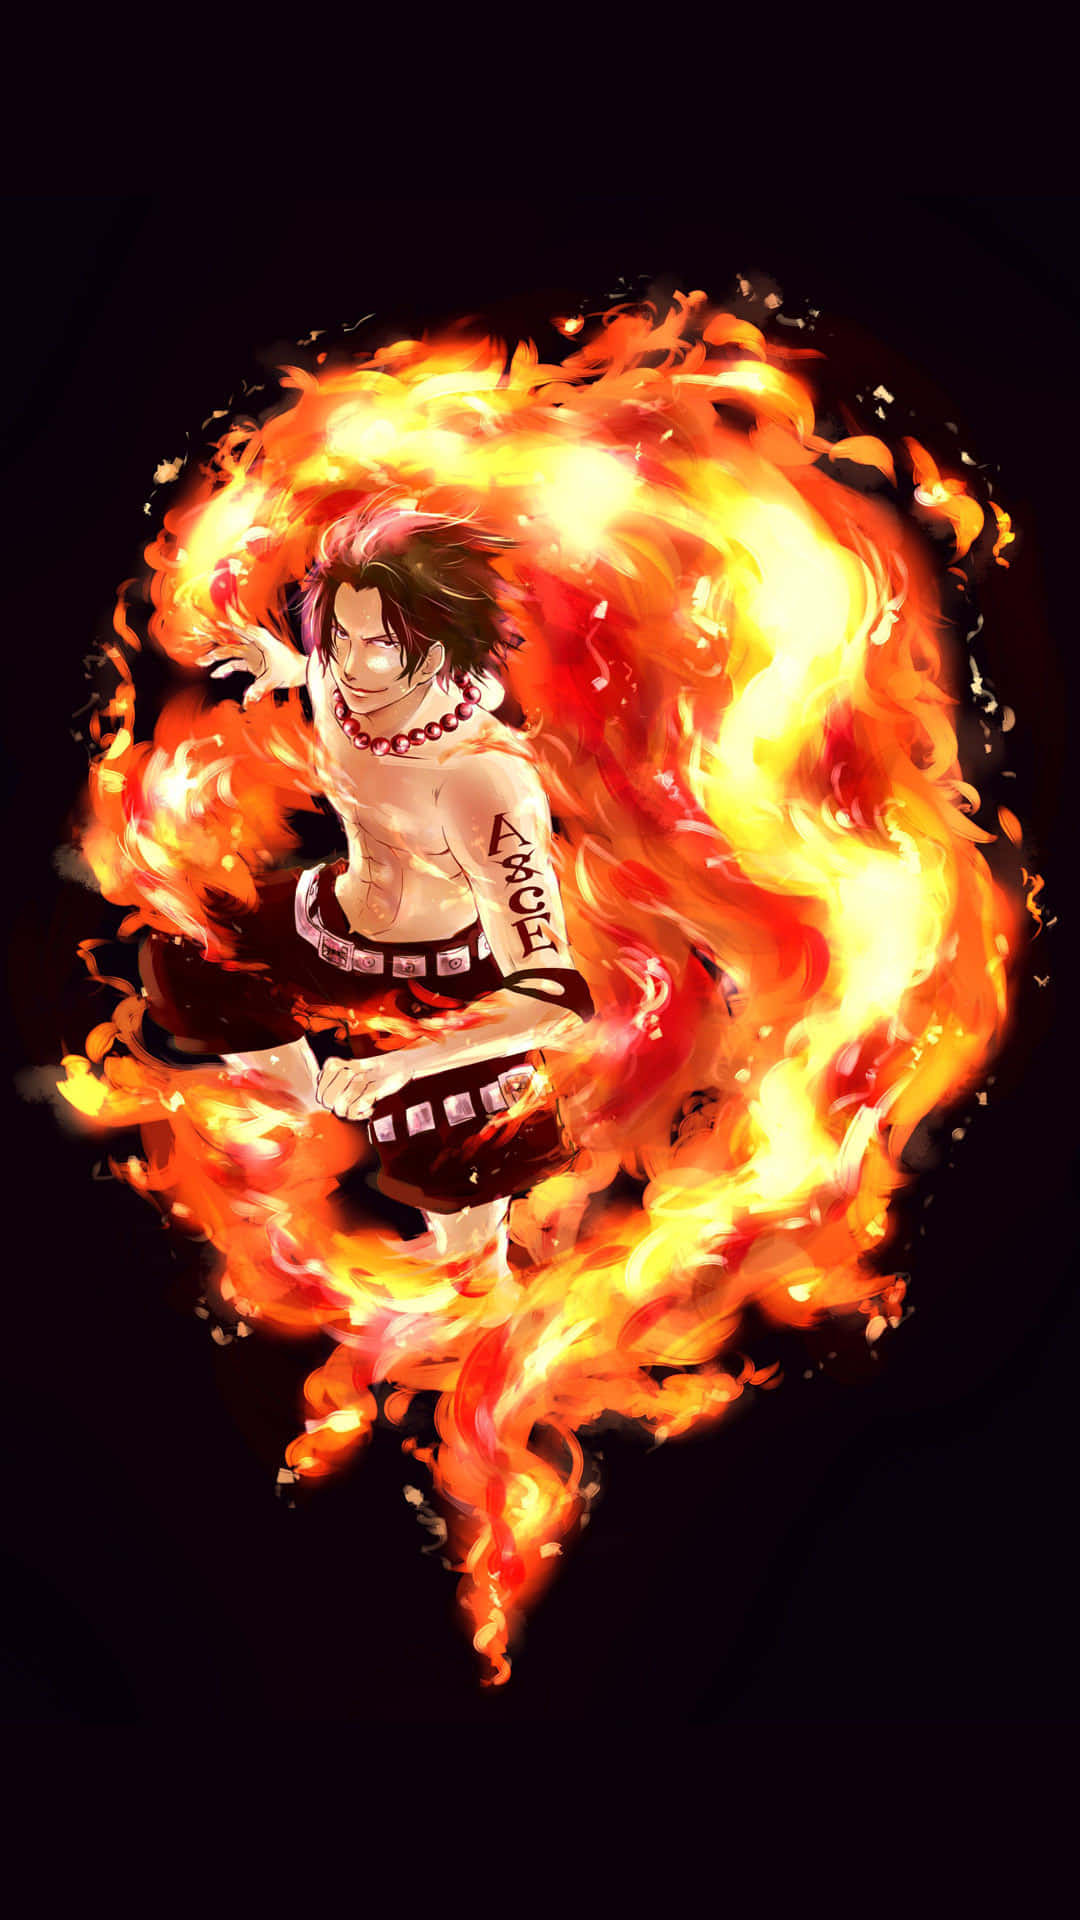 Portgas D Ace, The Warrior Of Fire Background